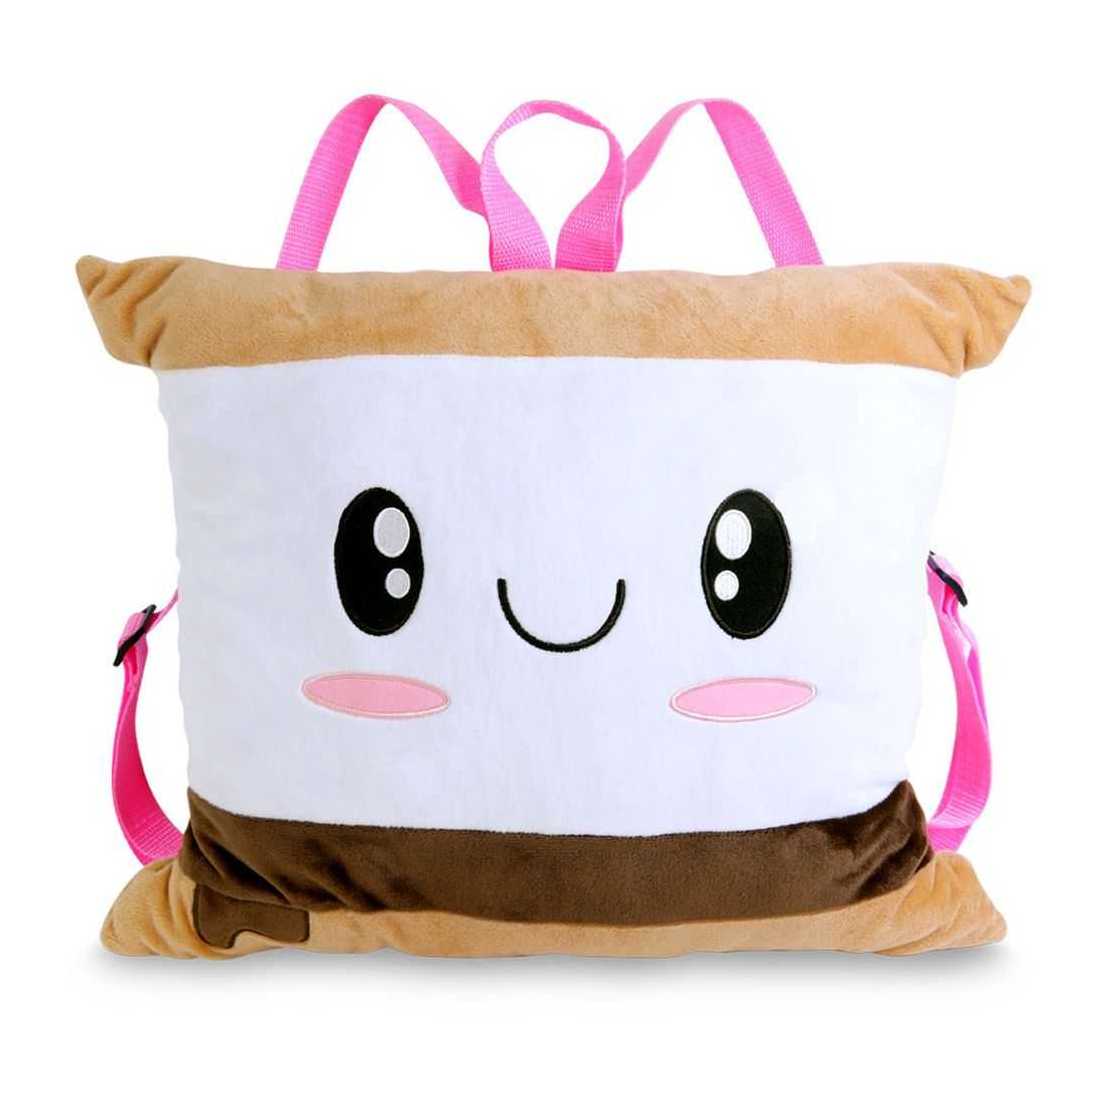 Scentco Plush S'mores Backpack